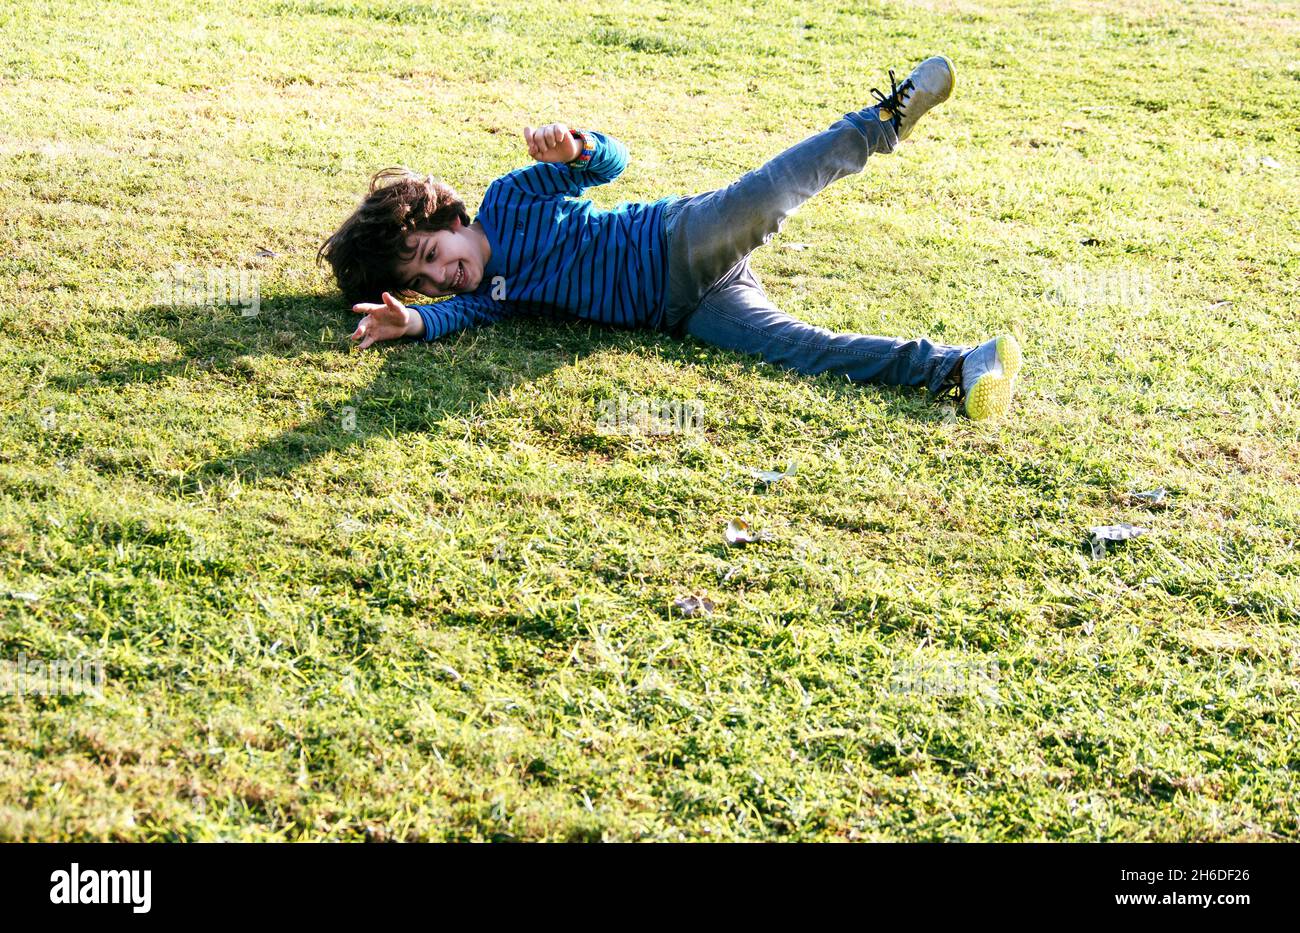 Kids Having Fun Rolling Down A Grassy Hill Stock Photo, Picture